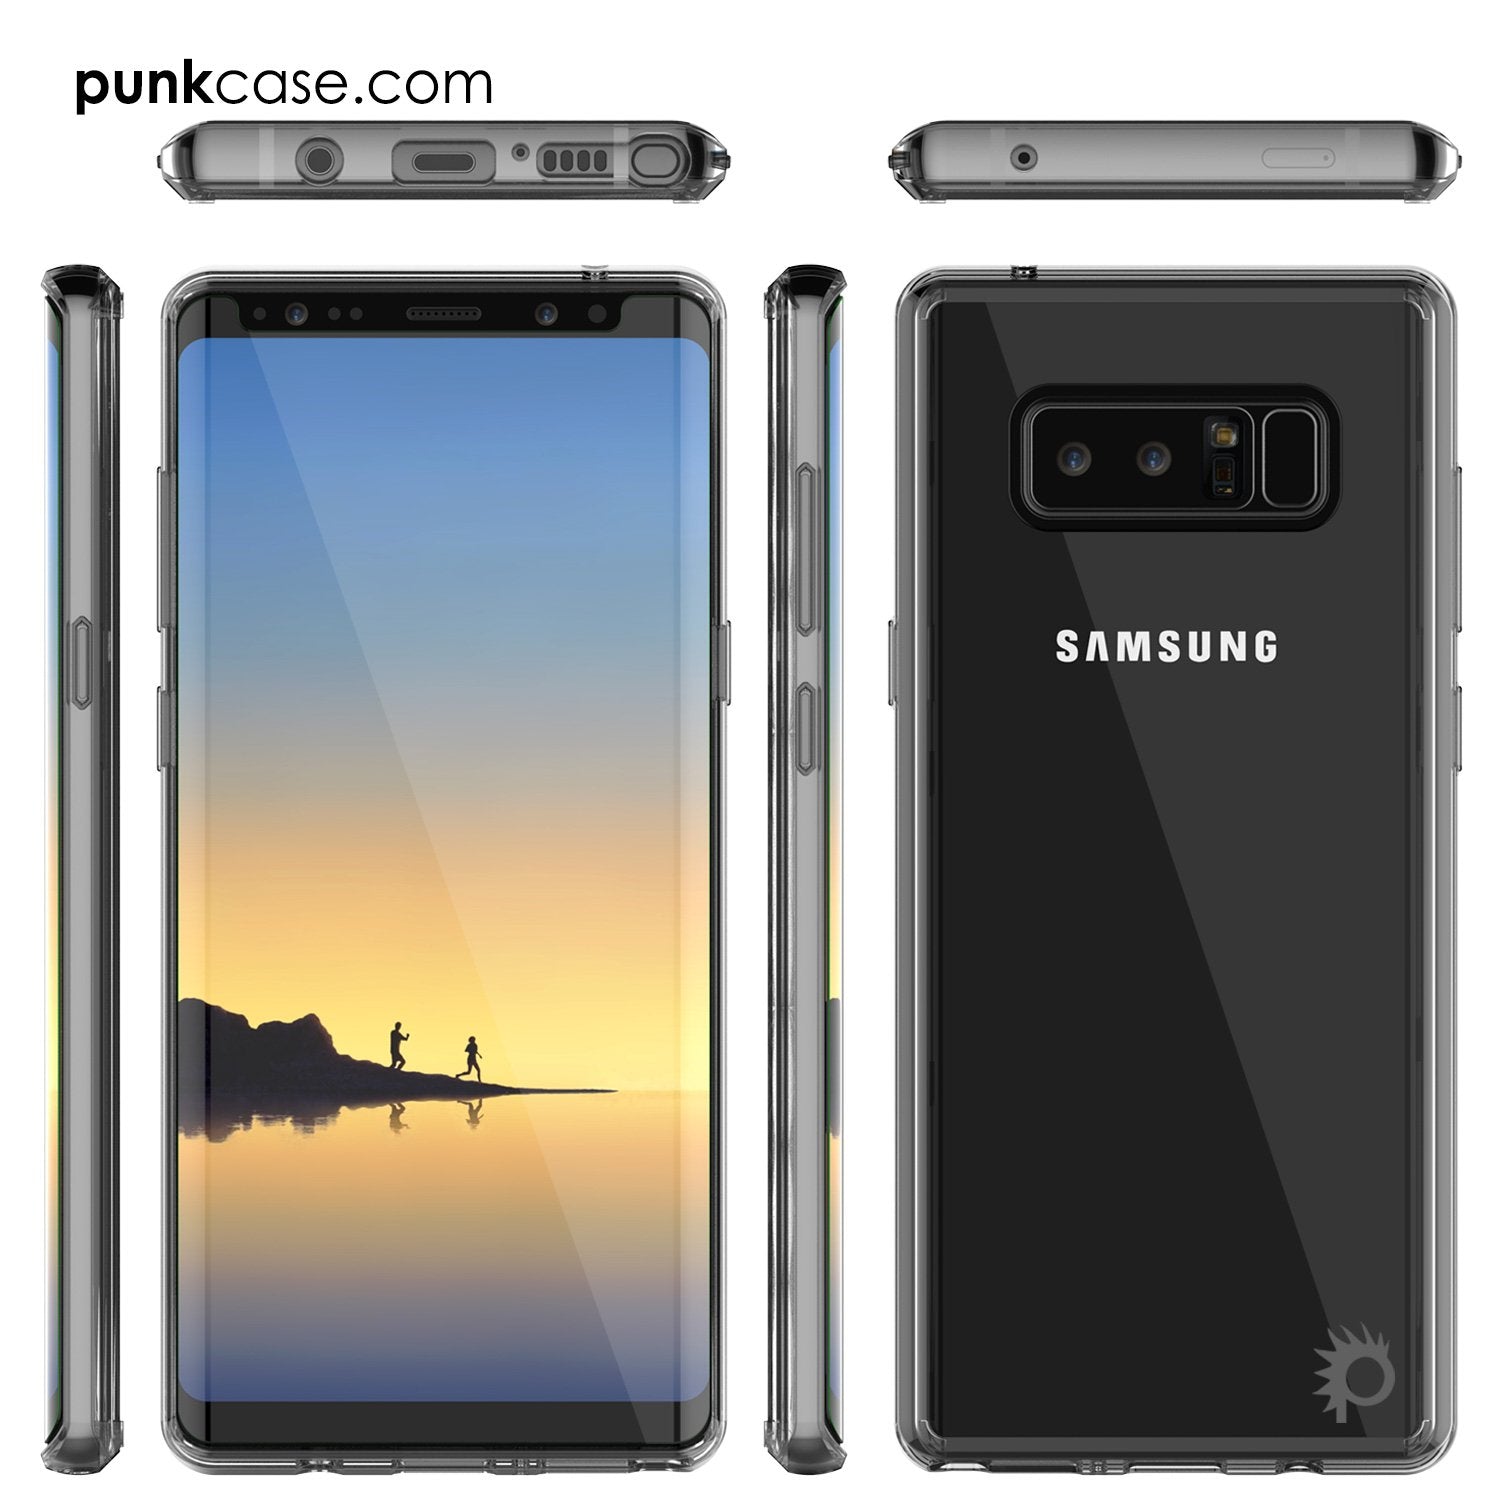 Galaxy Note 8 Case, PUNKcase [LUCID 2.0 Series] [Slim Fit] Armor Cover w/Integrated Anti-Shock System & PUNKSHIELD Screen Protector [Clear]